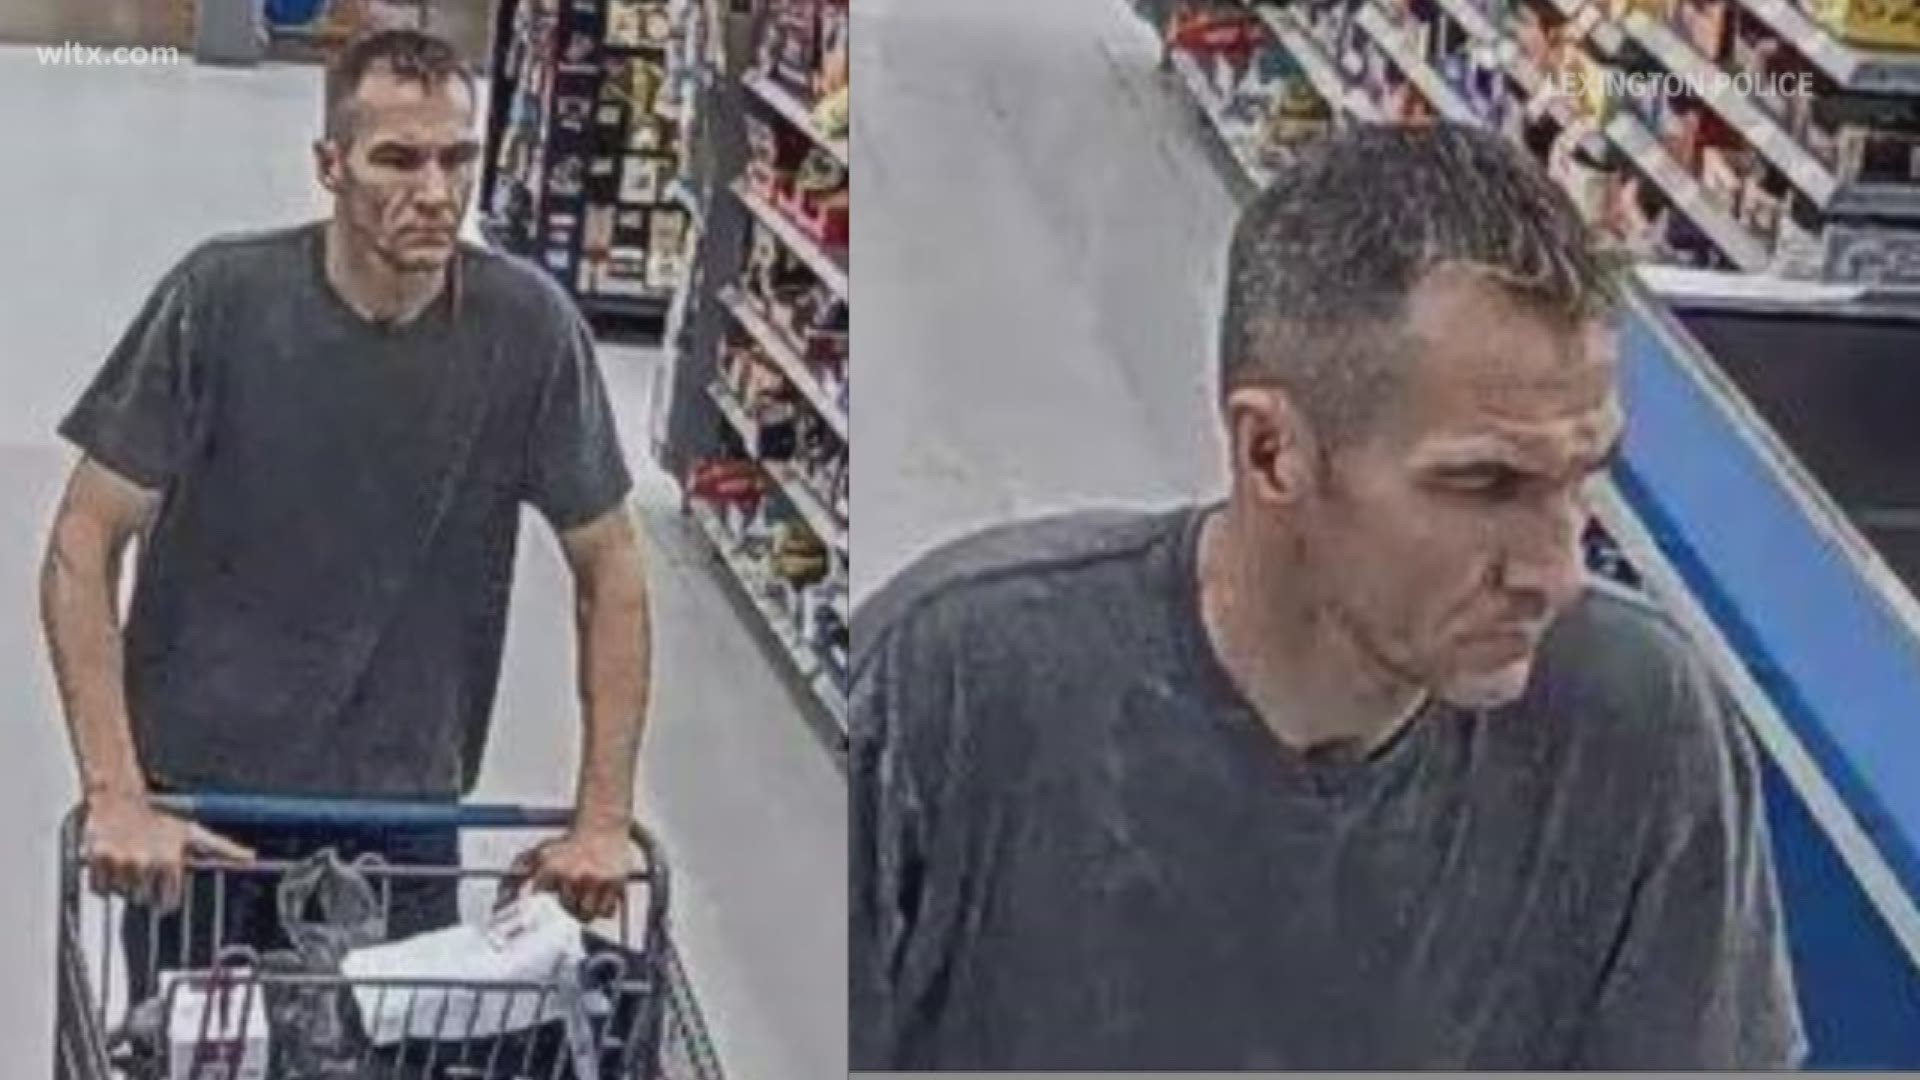 Lexington Police are looking for a man involved in a shoplifting incident at Walmart.